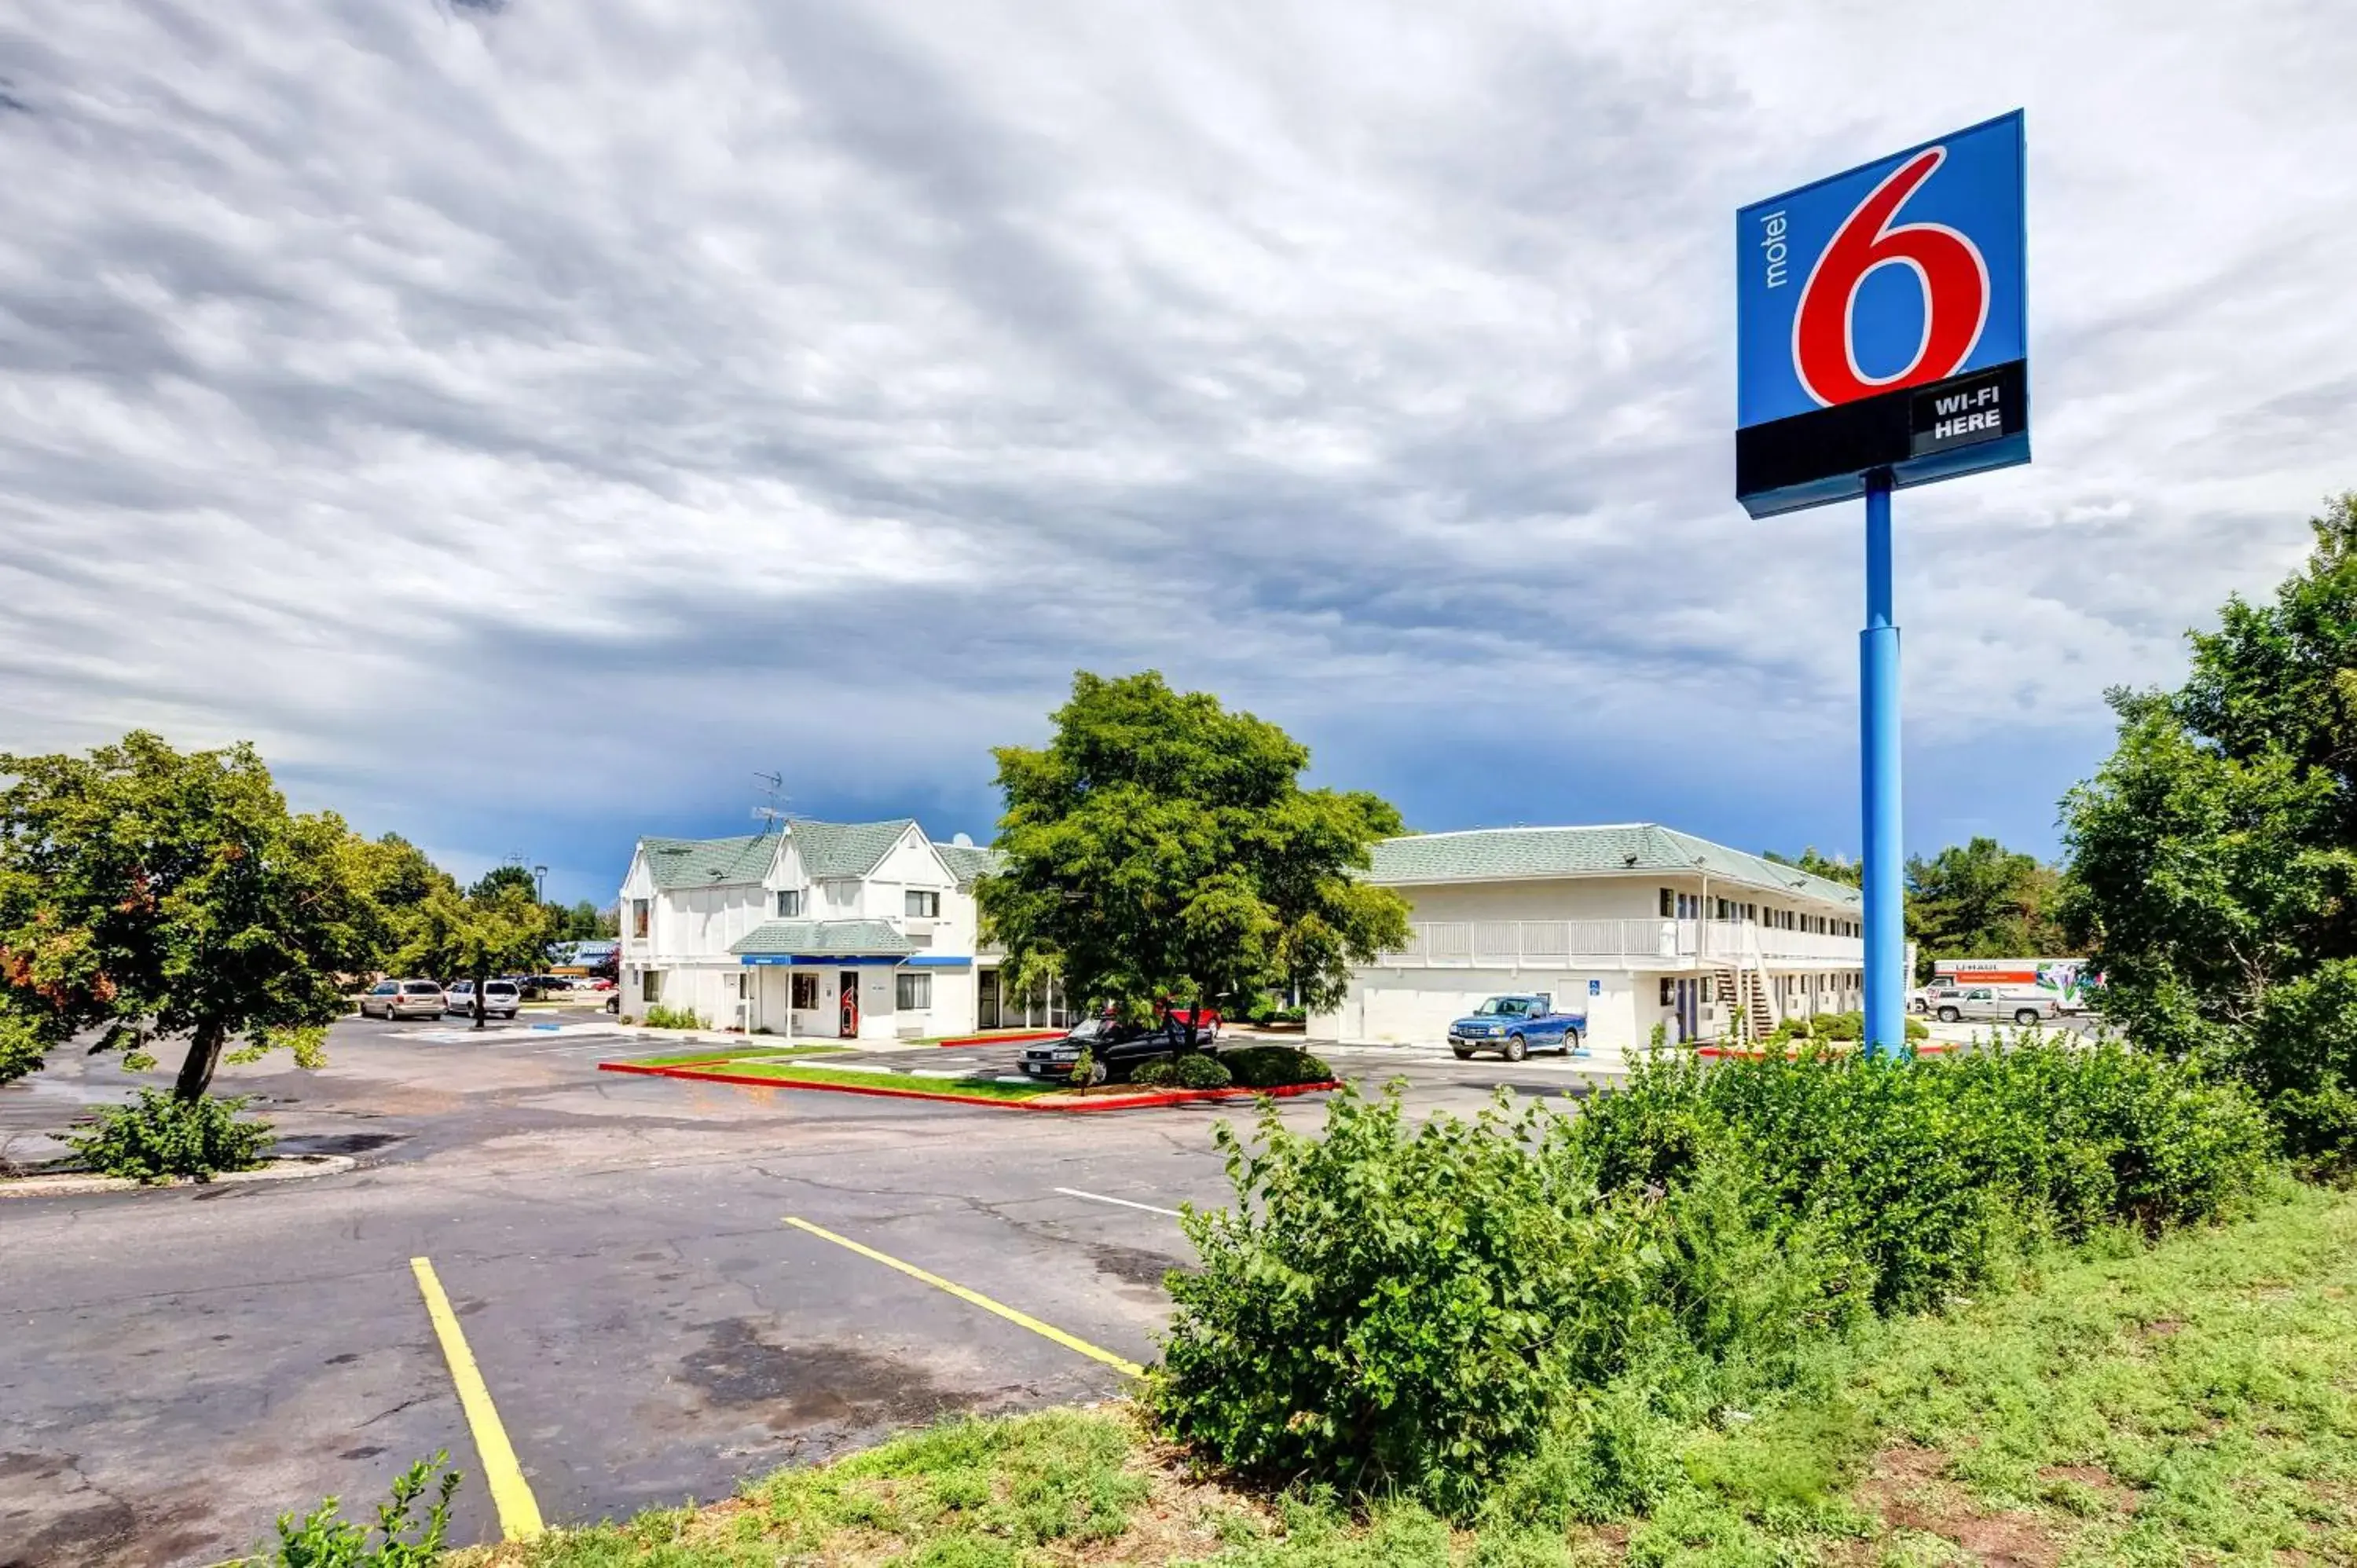 Property building in Motel 6-Wheat Ridge, CO - West - Denver North